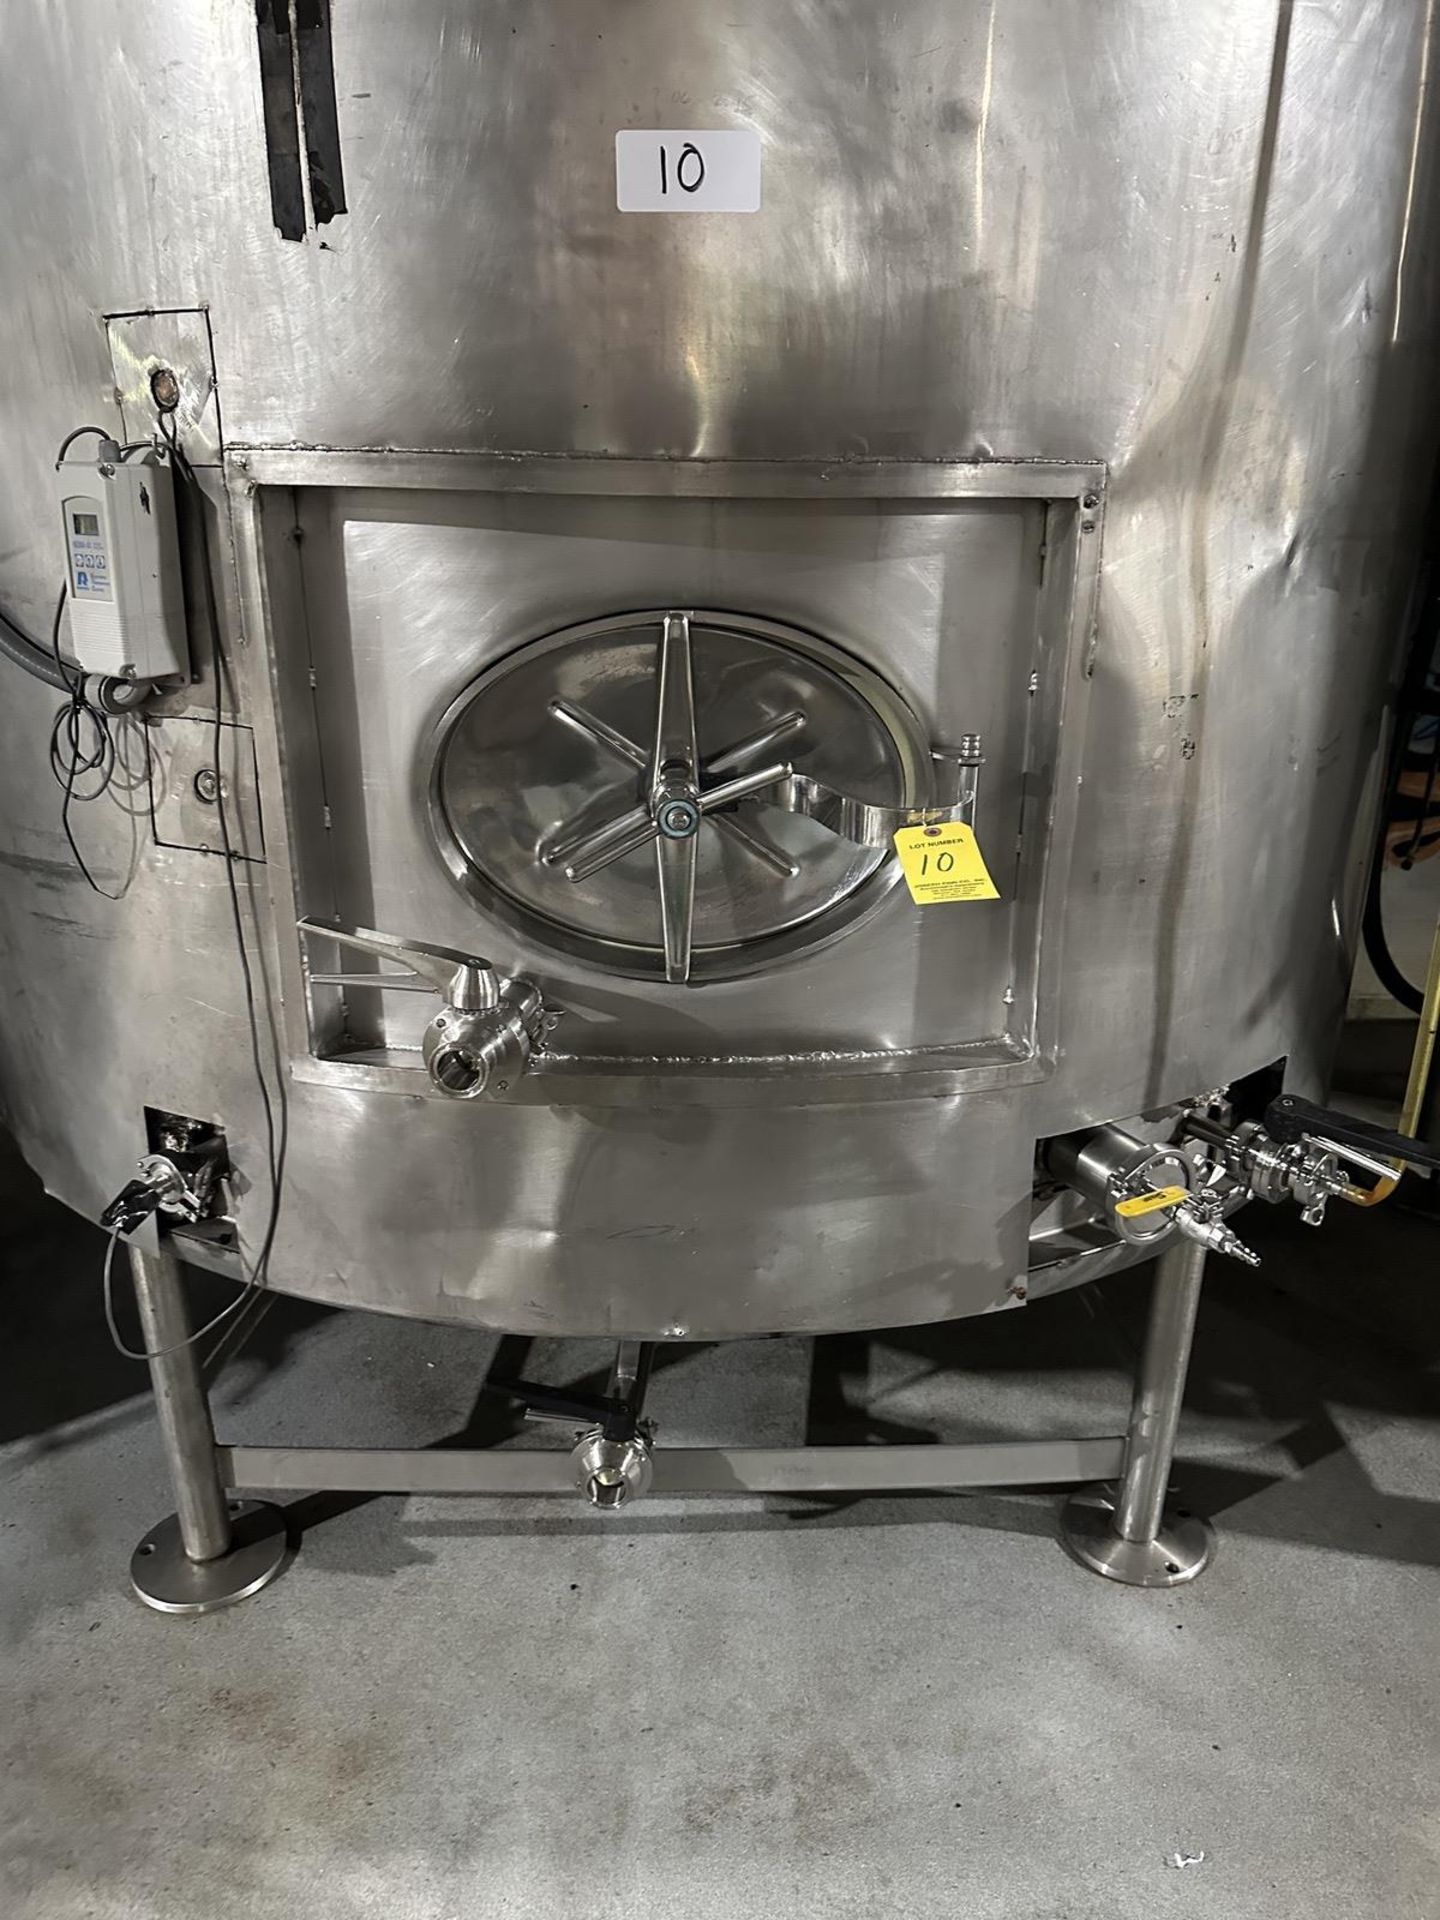 60 BBL Stainless Steel Determination Tank, Glycol Jacketed | Rig Fee $350 - Image 3 of 4